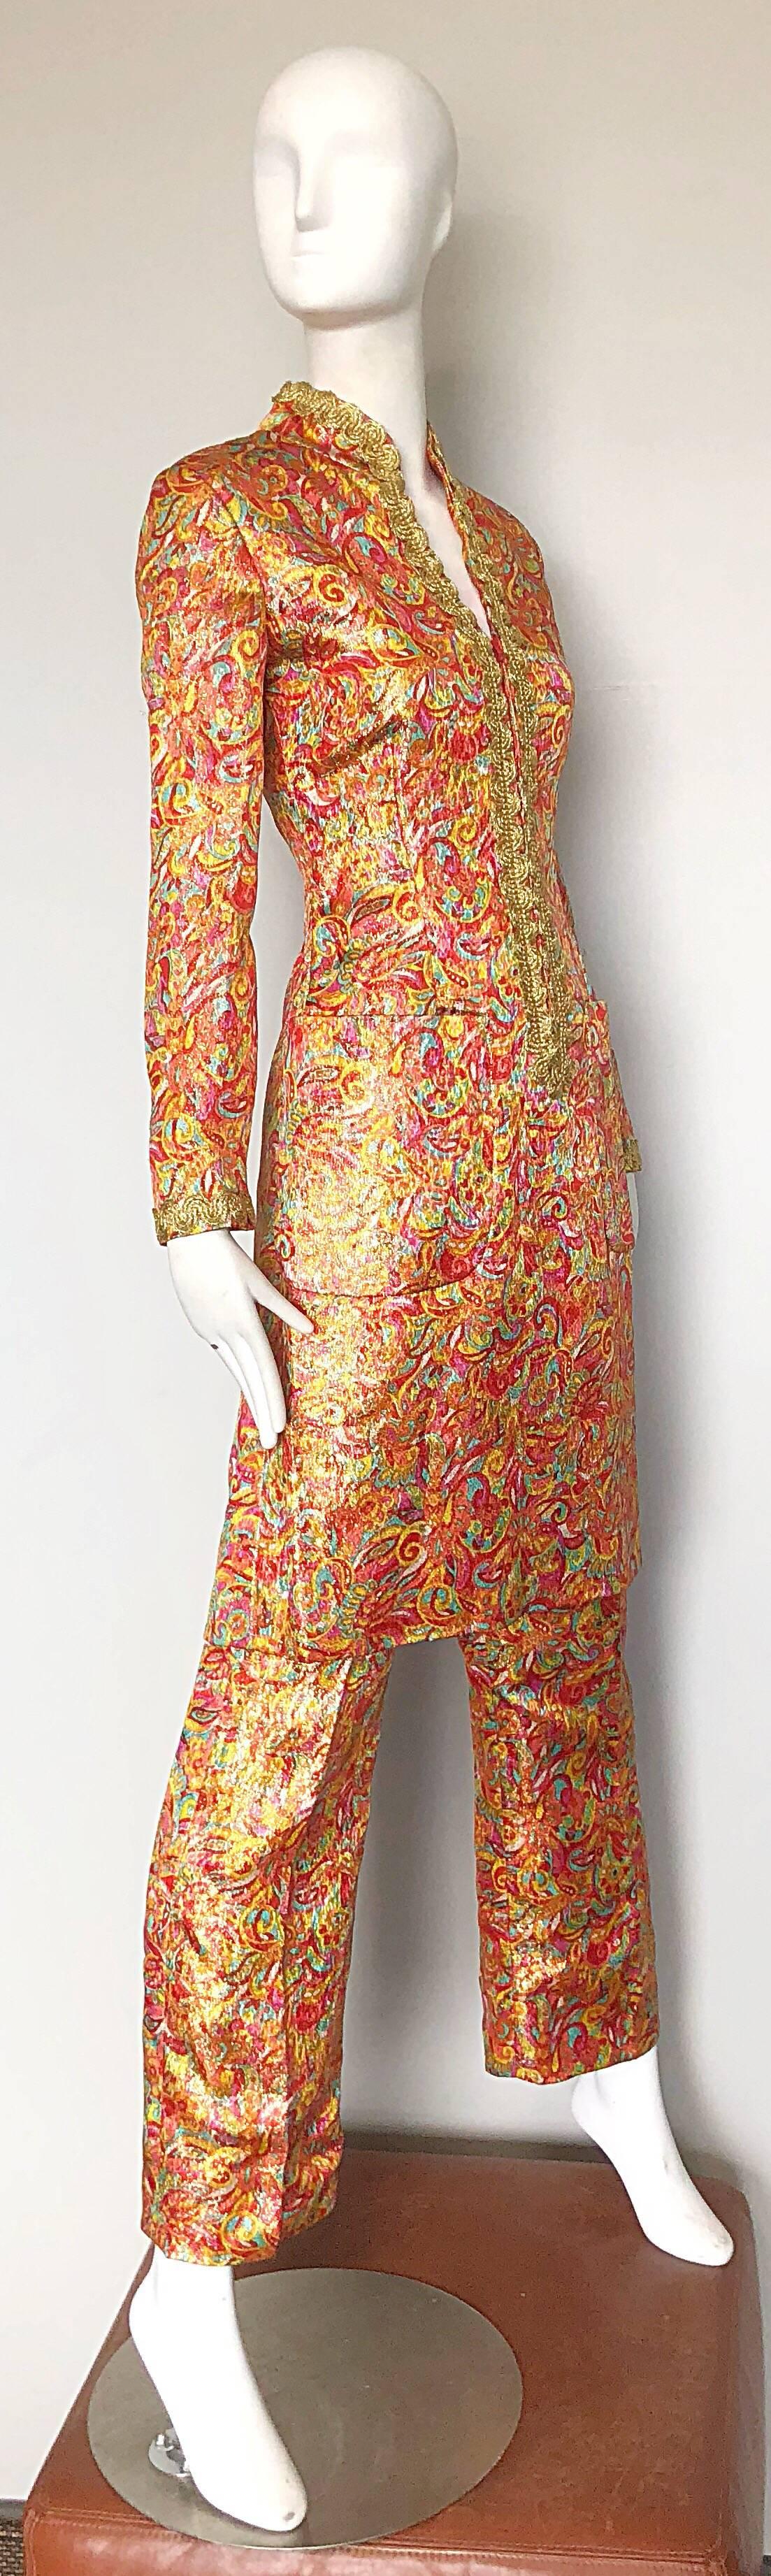 Incredible 1970s Neusteters Mosaic Print Tunic Dress + Flared Leg Pants Ensemble In Excellent Condition For Sale In San Diego, CA